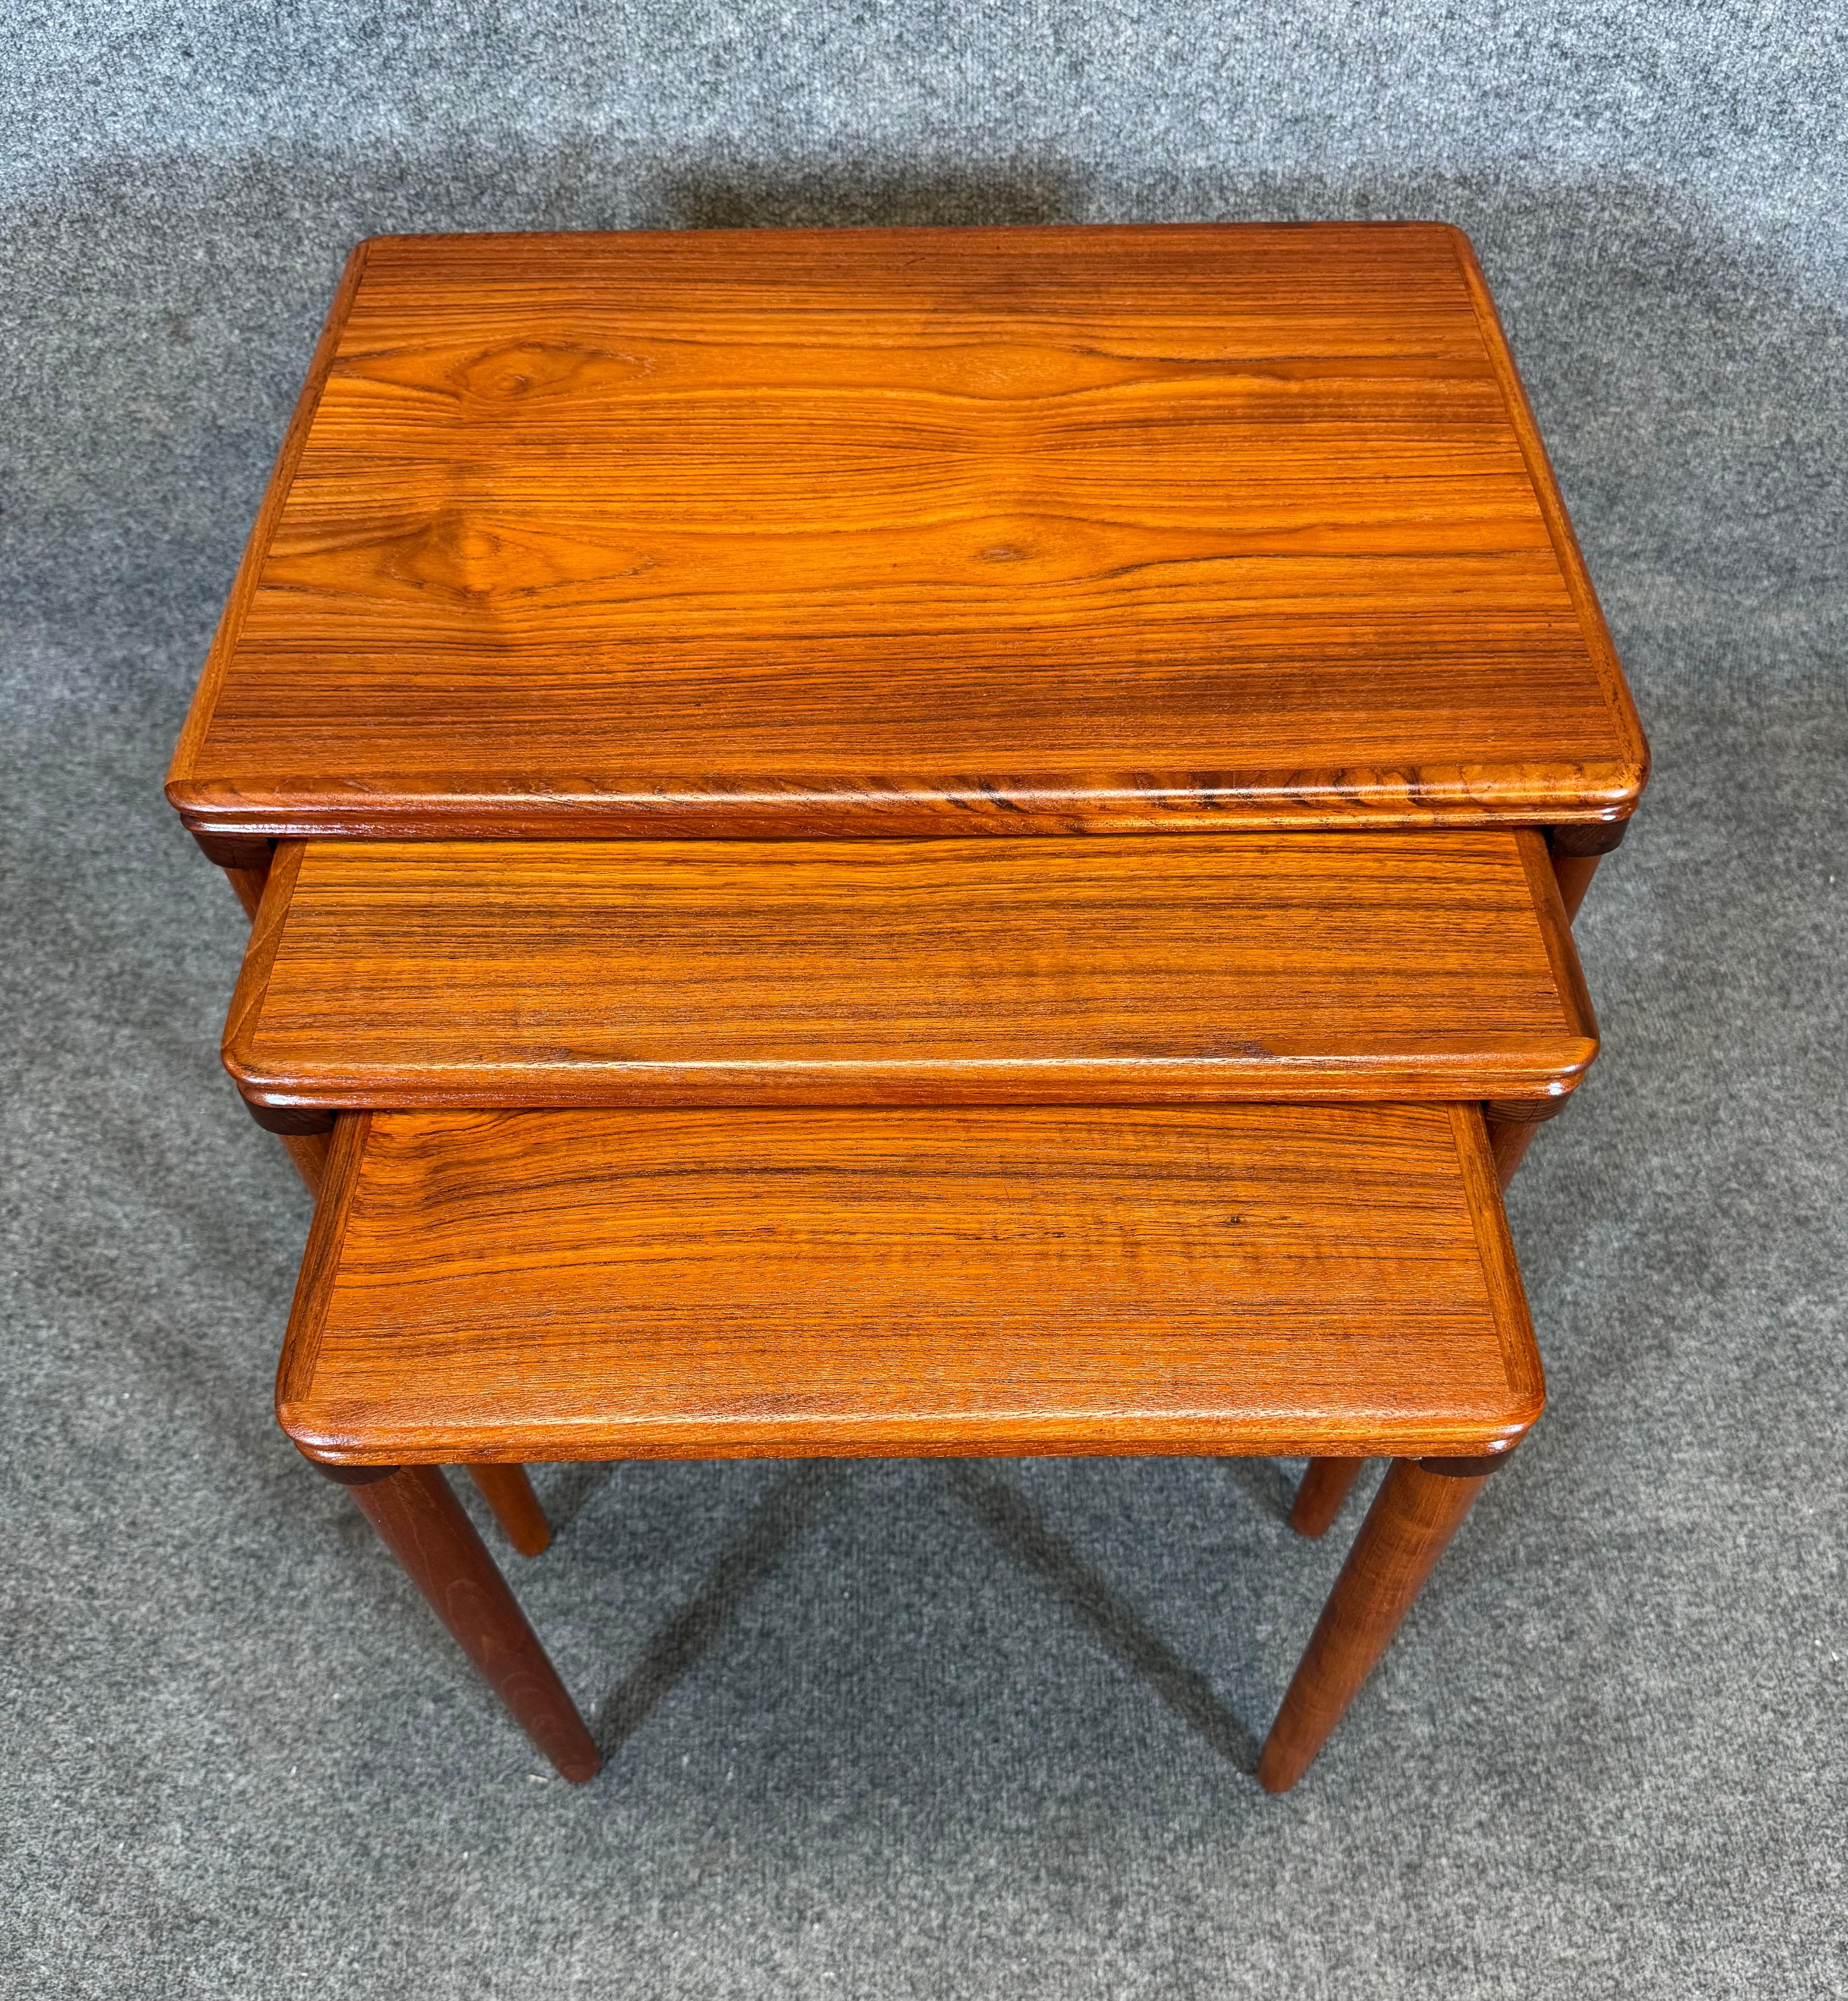 Here is a beautiful set of three scandinavian modern nesting tables in teak manufactured in Denmark in the 1960's.
These tables, recently imported from Europe to California before their refinishing, feature a vibrant wood grain and tapered legs in